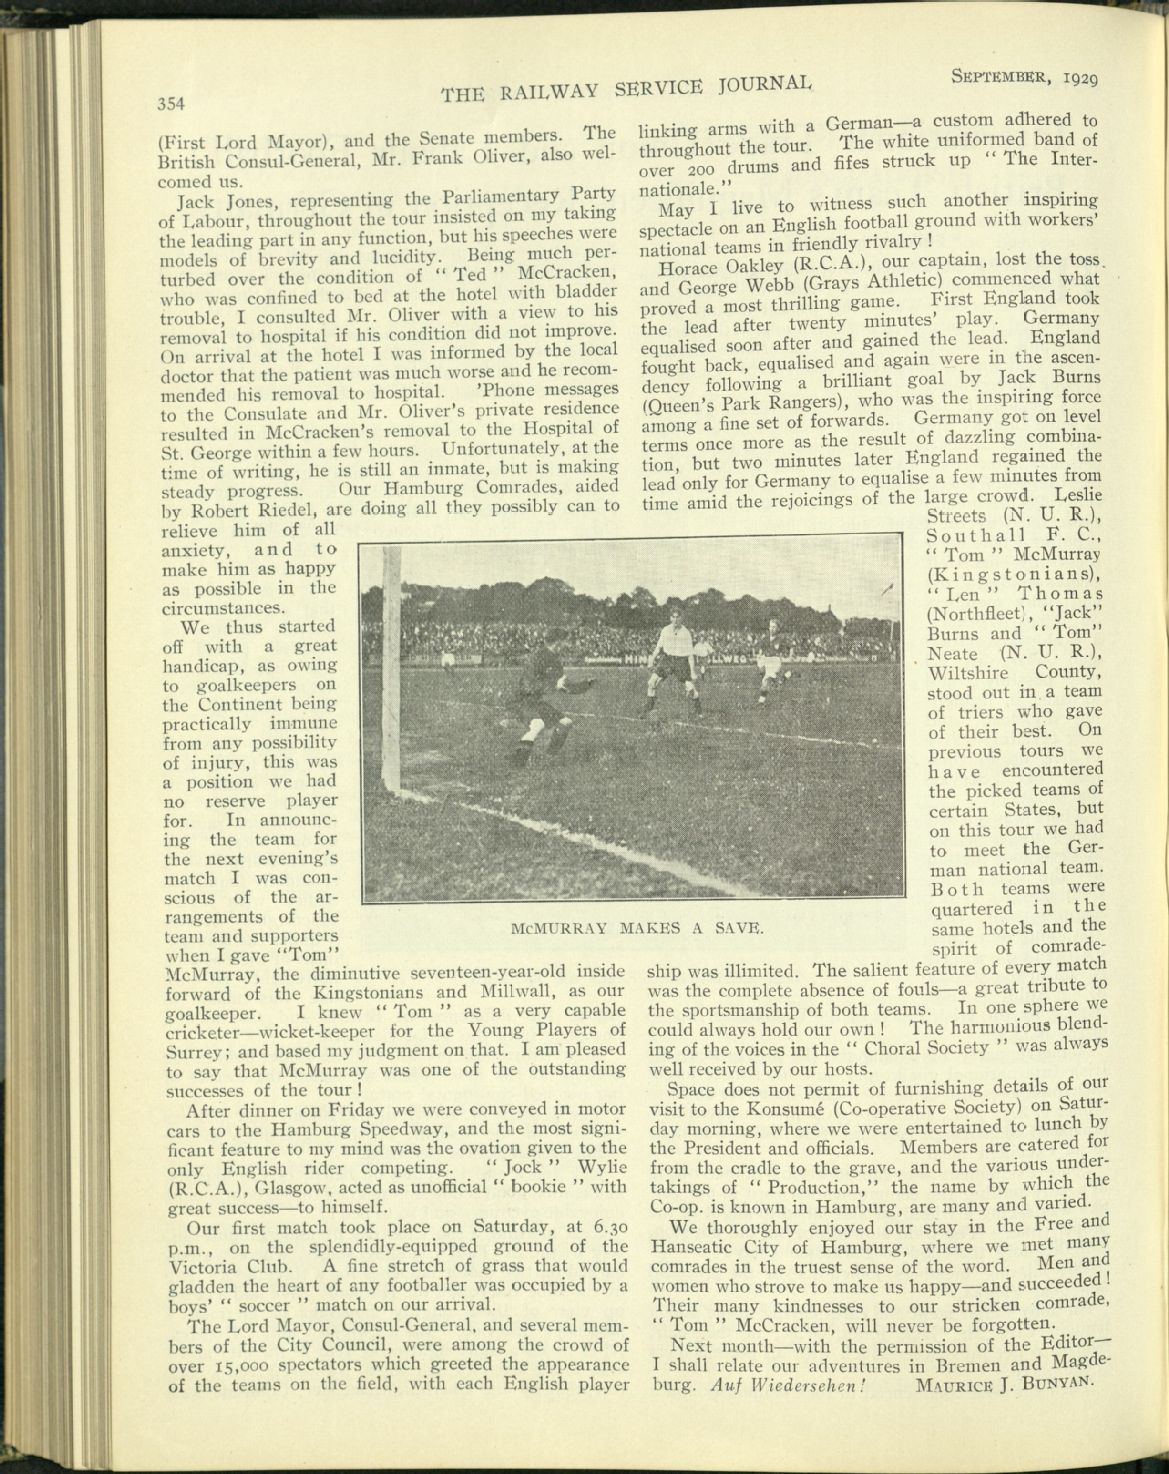 Article on football tour of Germany, 1929